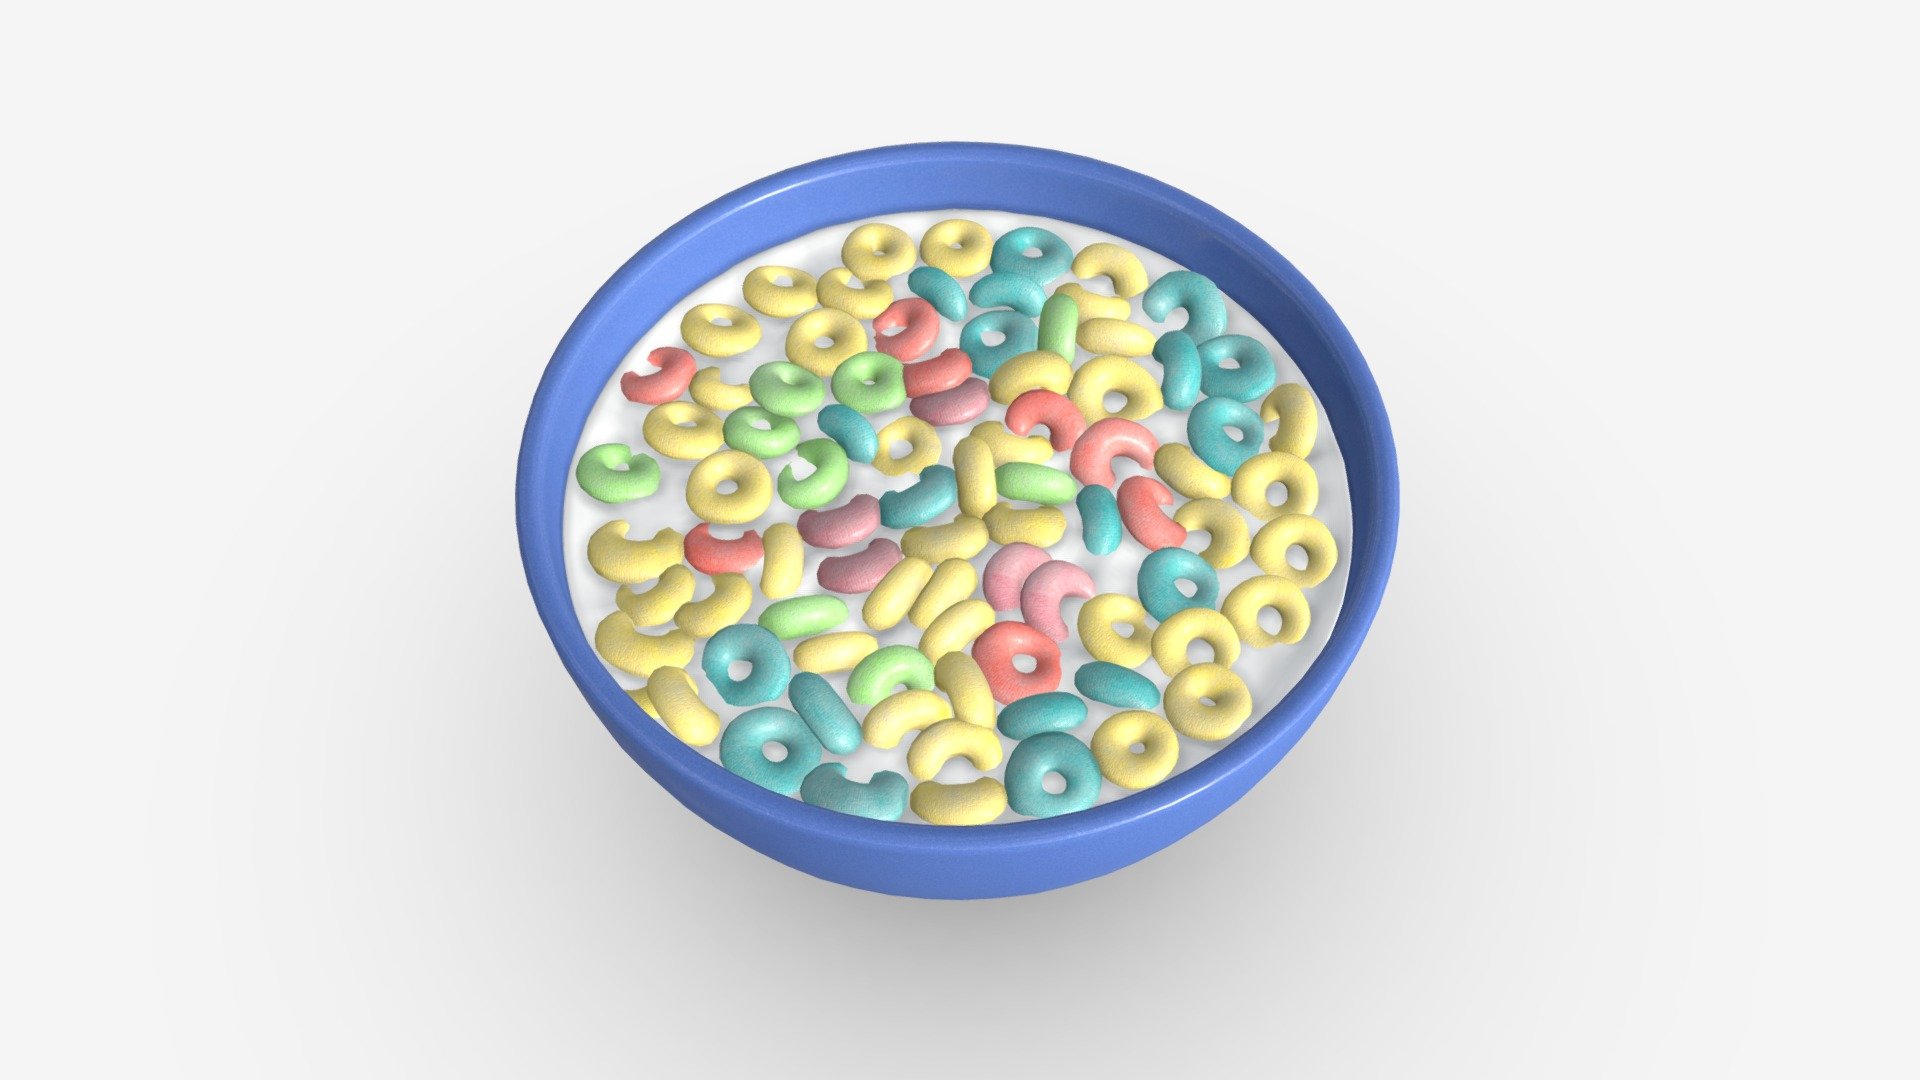 Bowl of Colored Cheerios with Milk - Buy Royalty Free 3D model by HQ3DMOD (@AivisAstics) 3d model